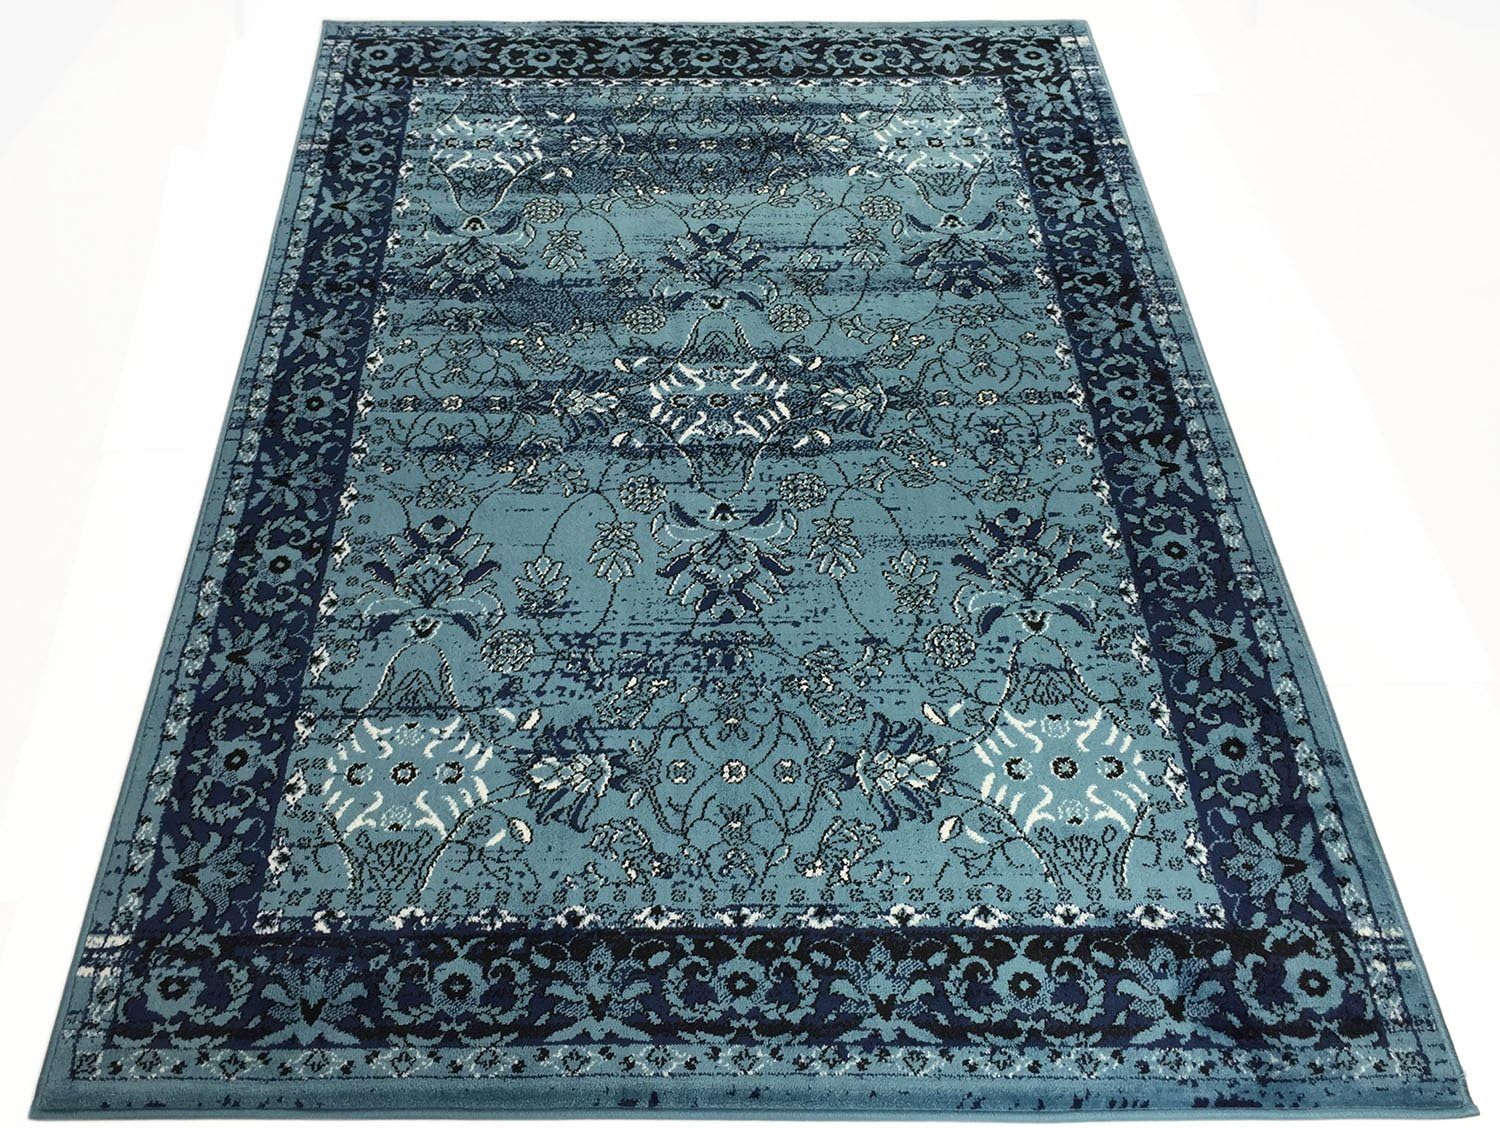 Comfy Collection Vintage Mahal Design Area Rug Oriental Traditional Antique Look (Teal Blue, 4'11" x 6'11")-3